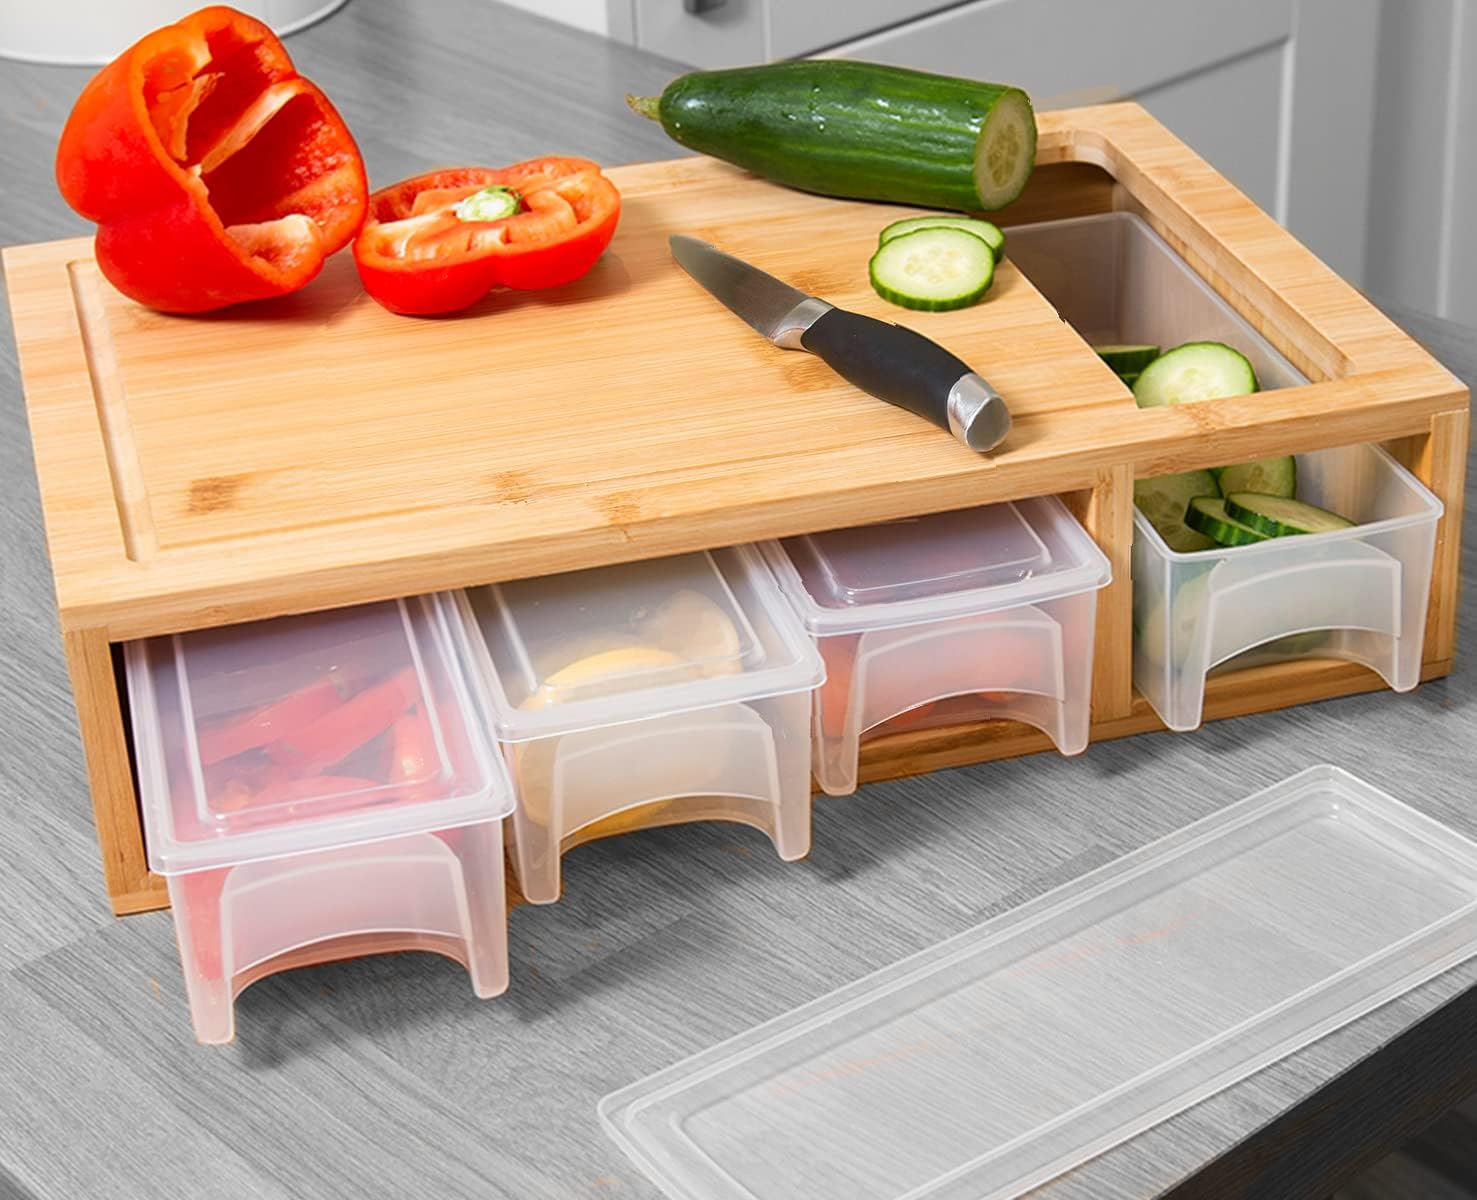 An Honest Review of the Epicurean All-in-One Cutting Board